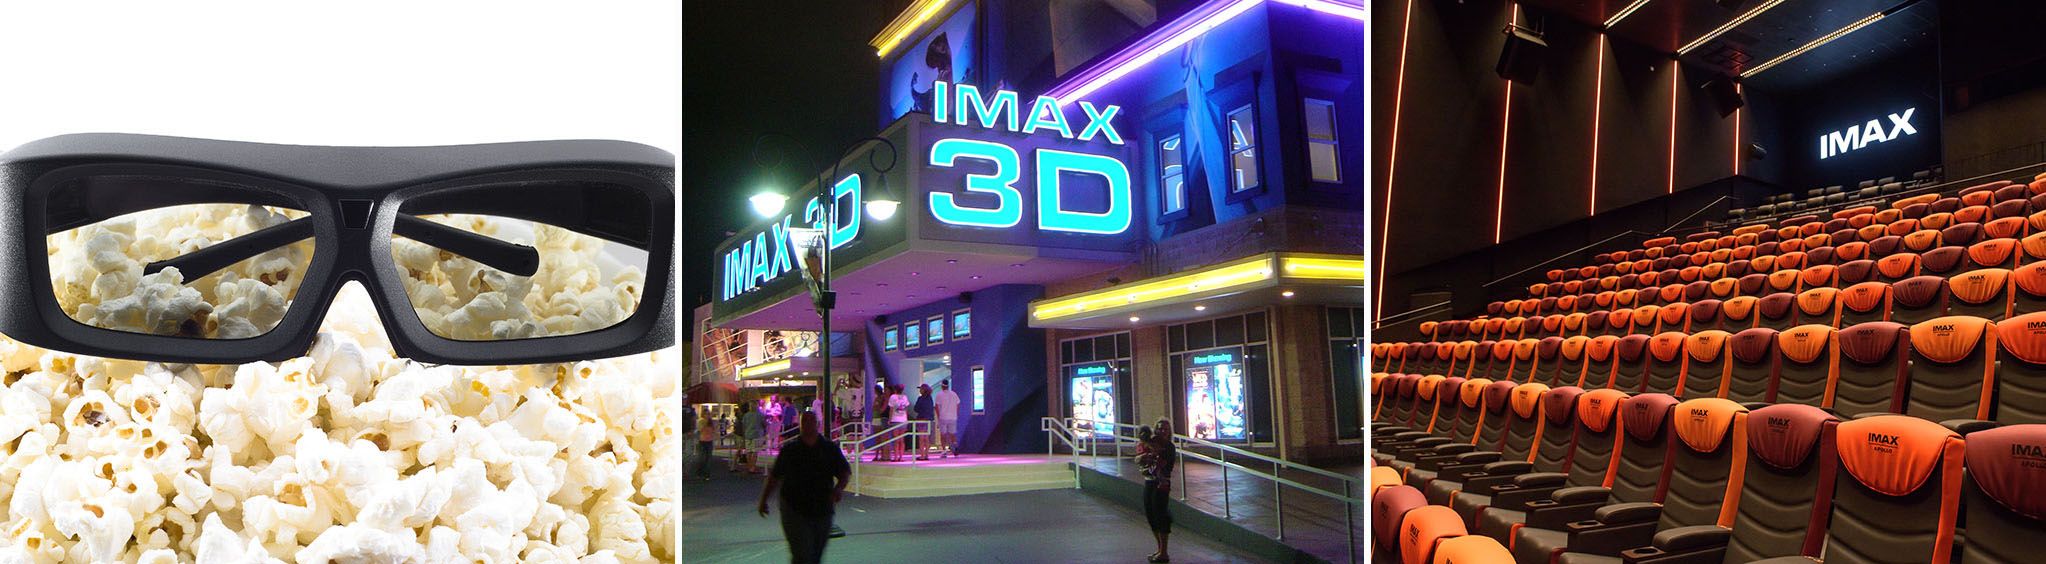 IMAX Discovery Theater